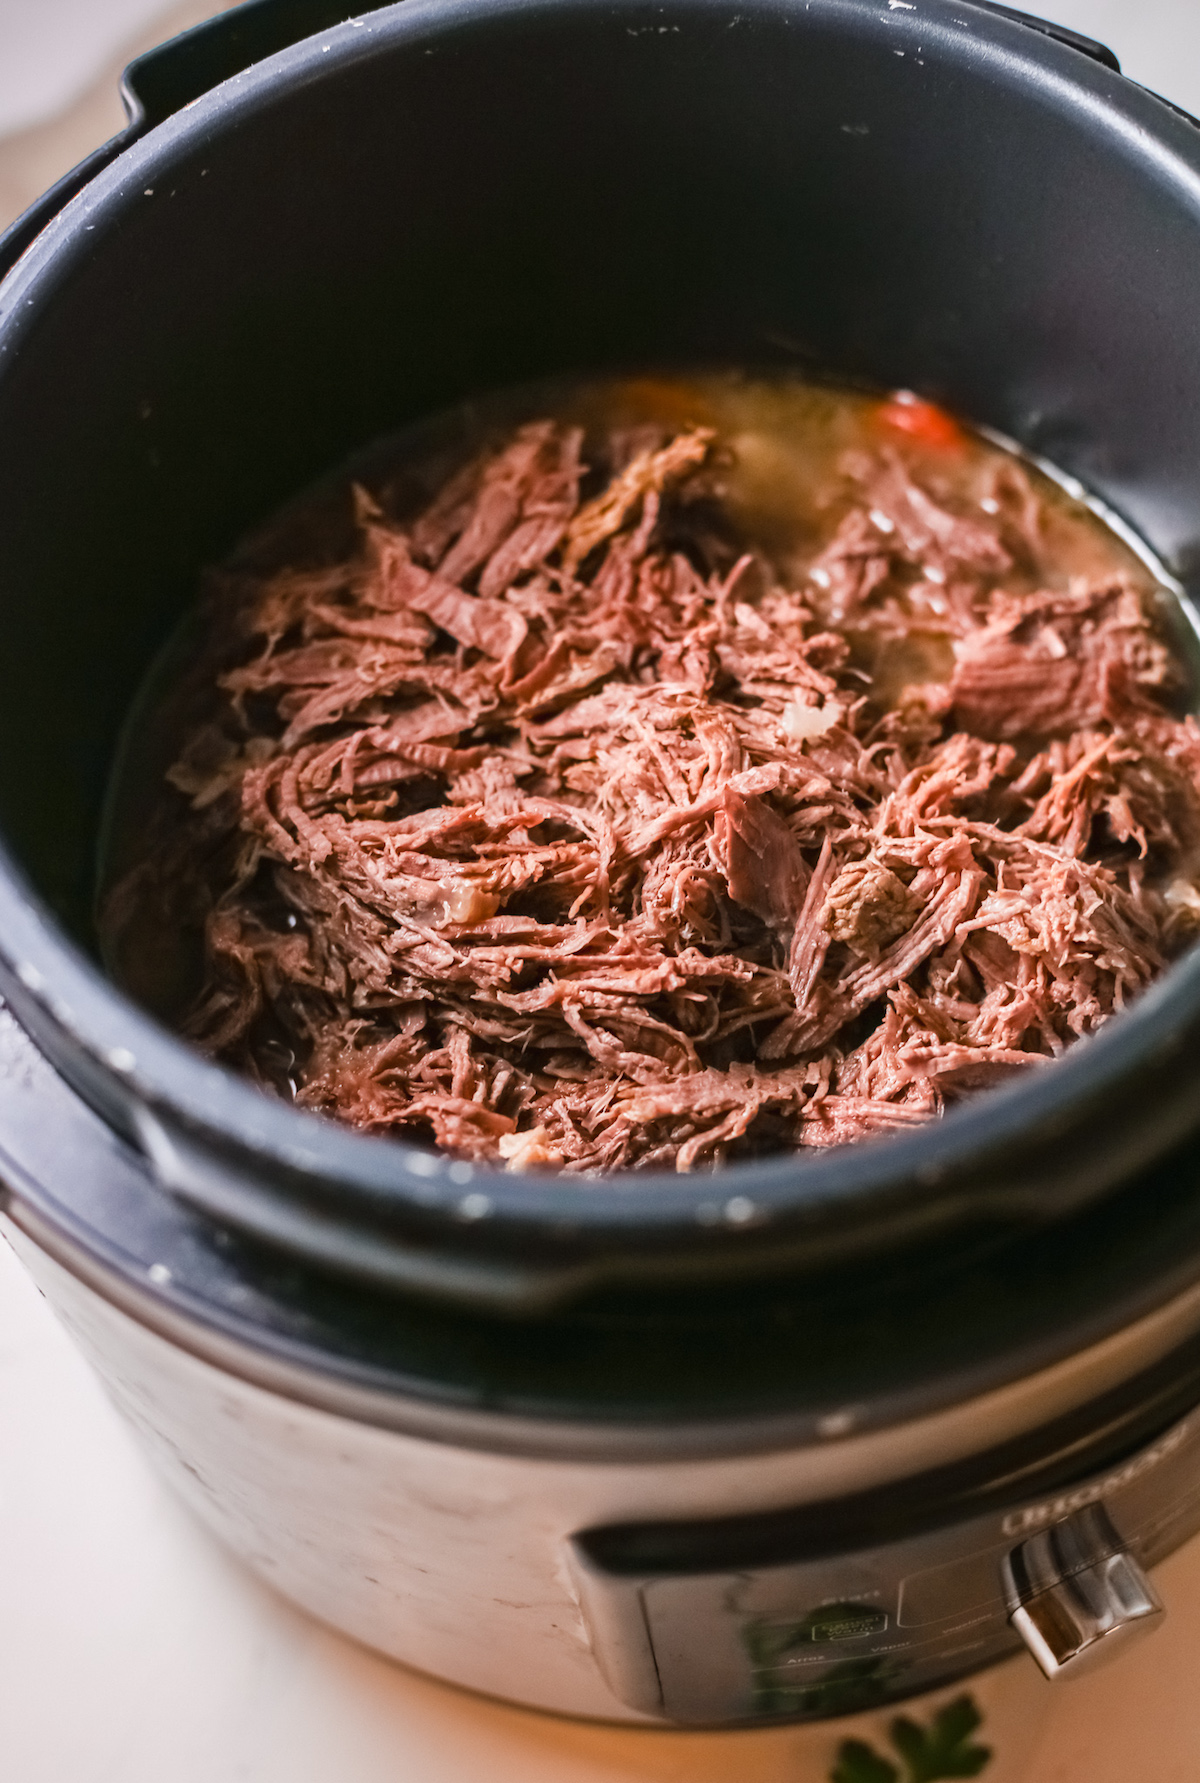 the finished barbacoa beef inside the instant pot